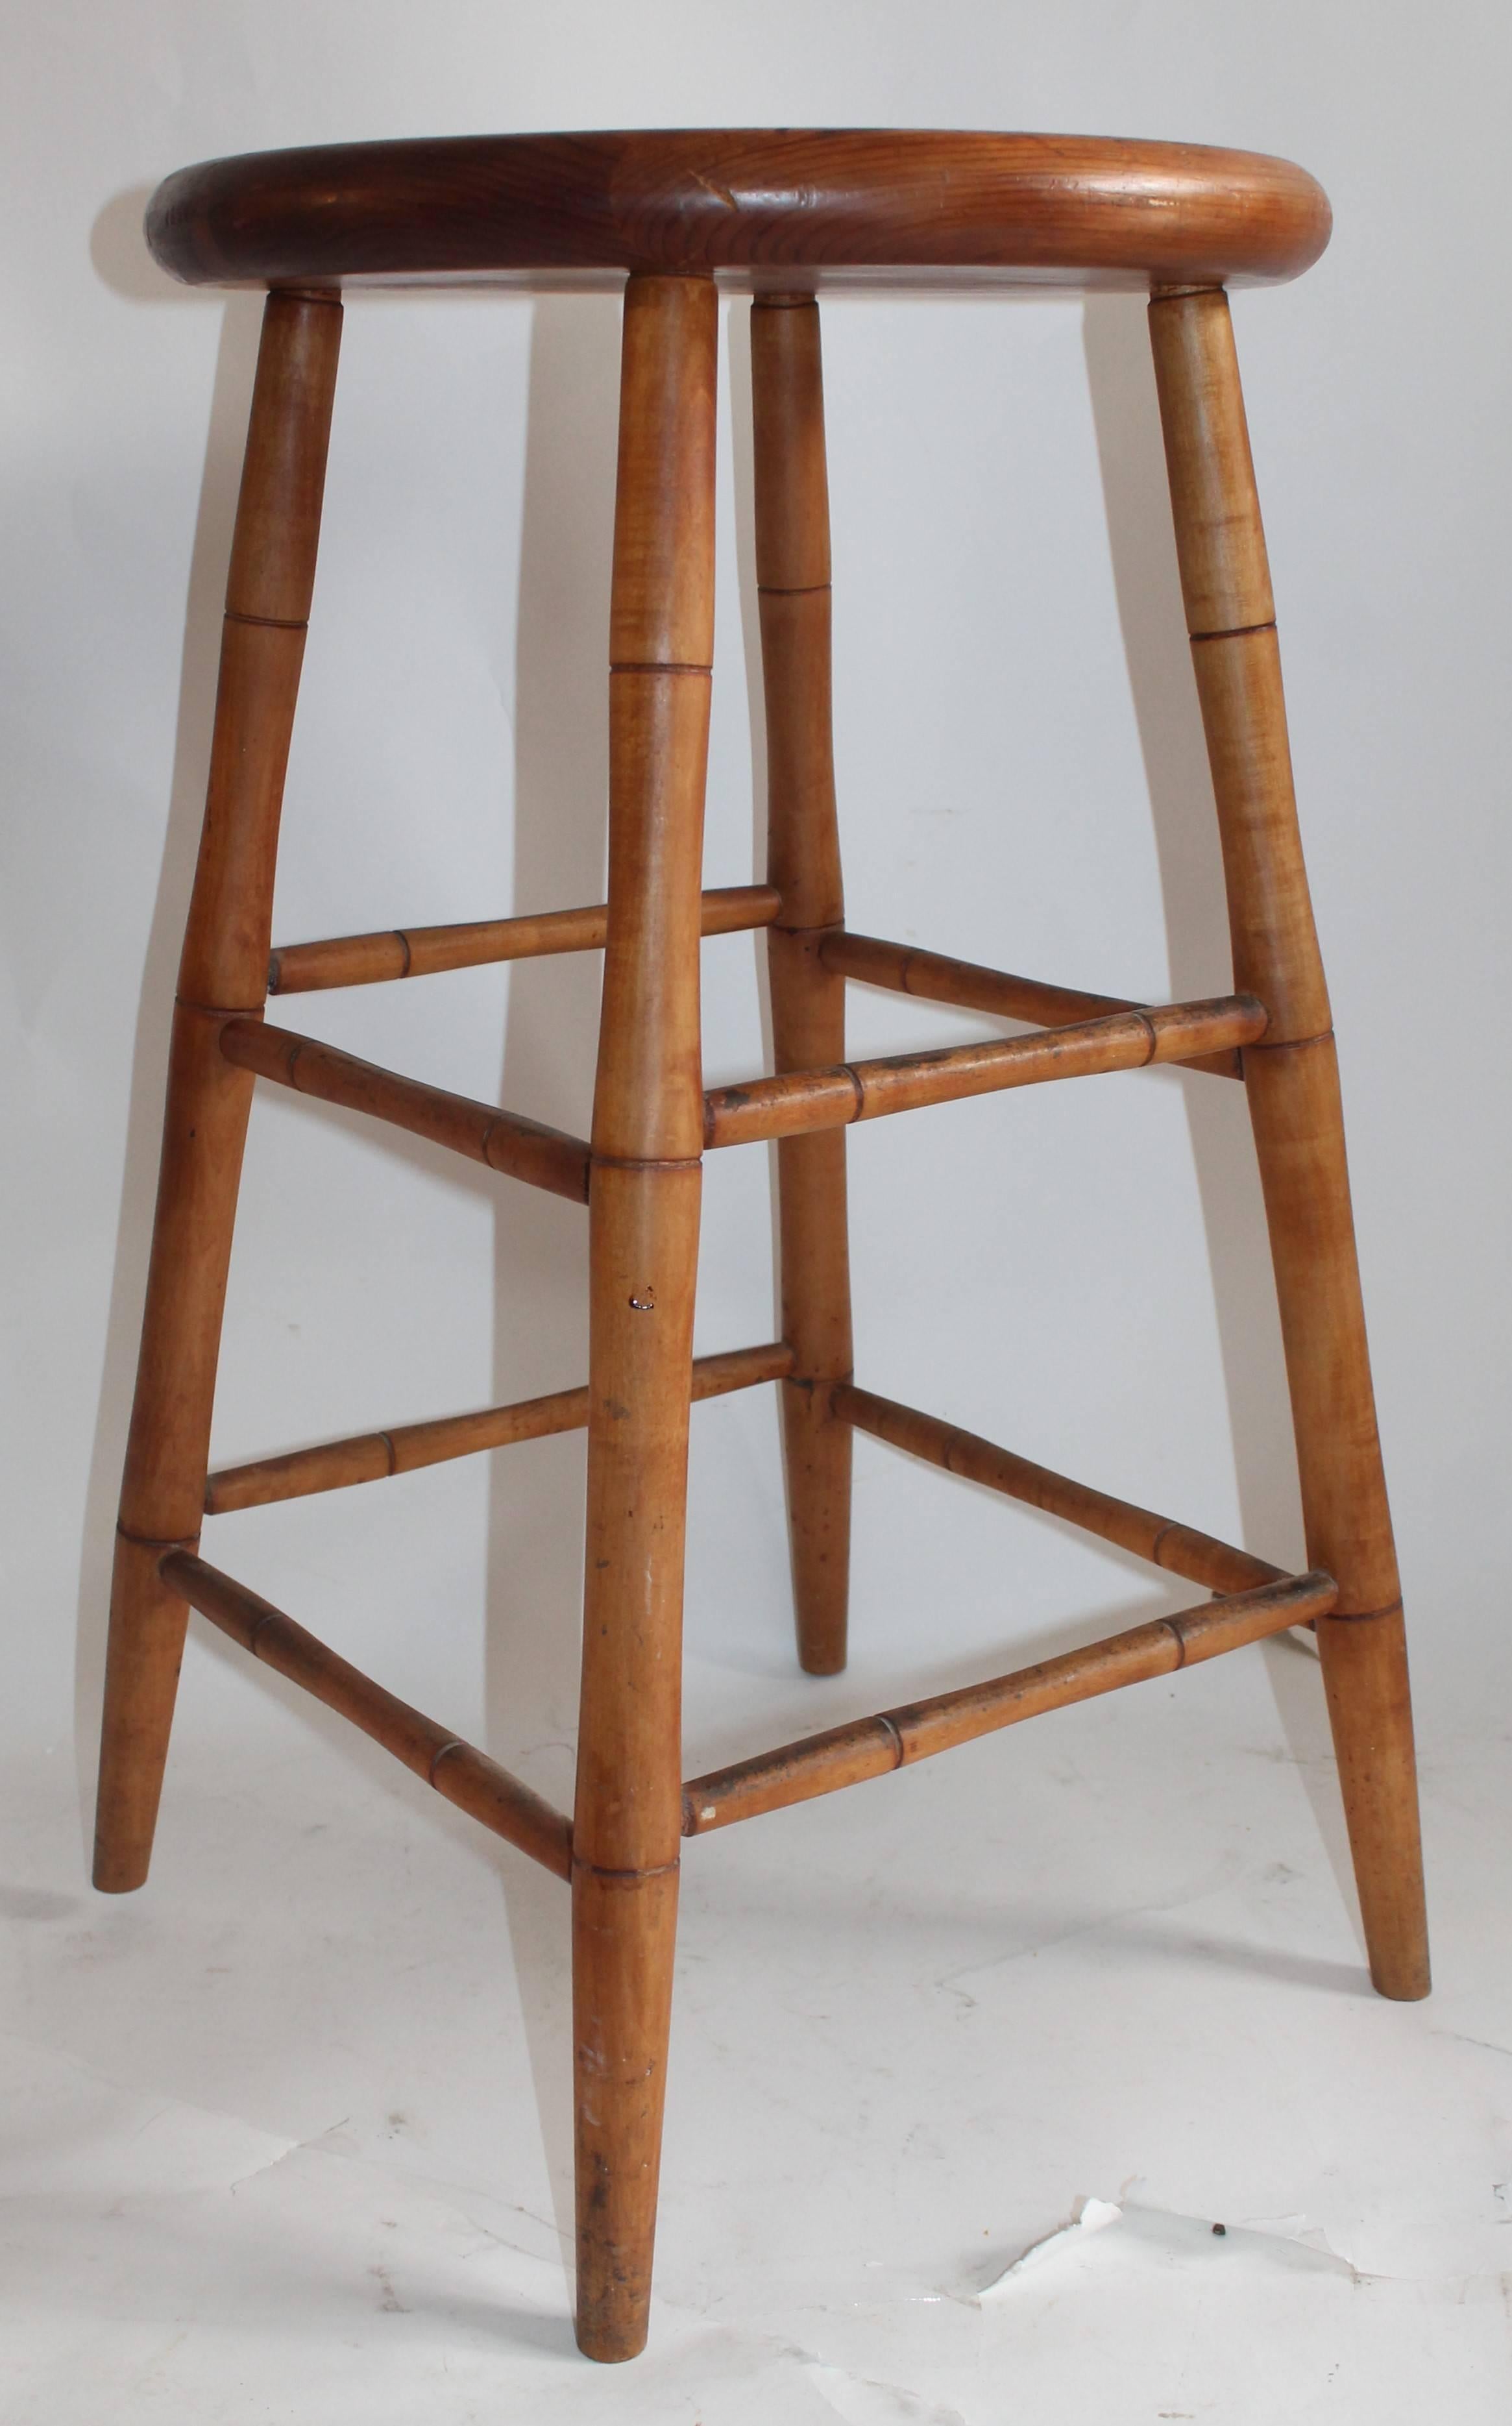 The condition and patina is the very best. The patina is the very best. This simple bar stool has a nice country look. The diameter of the plank seat is 18inches 
The furthest corner legs are 22inches apart. The height is 28